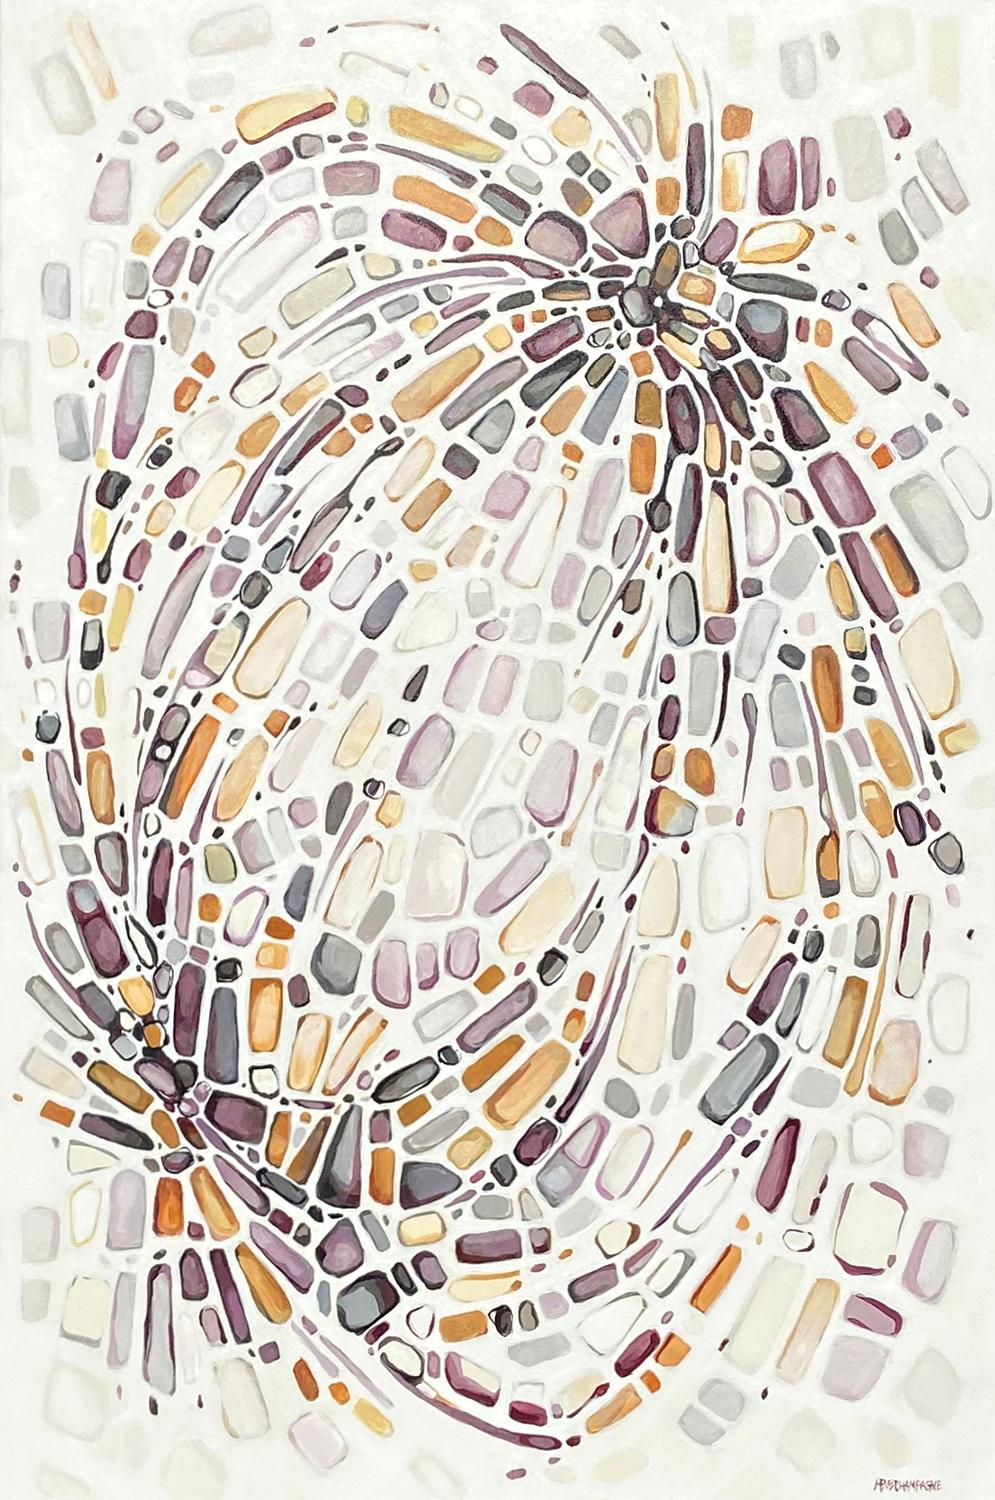 <p>Artist Comments<br>This painting plays with notions of deconstruction and movement. The placement of neutral colors with warm grays, desaturated purples, and ochre tones evokes a sense of fluidity. The intertwining strokes and organic shapes